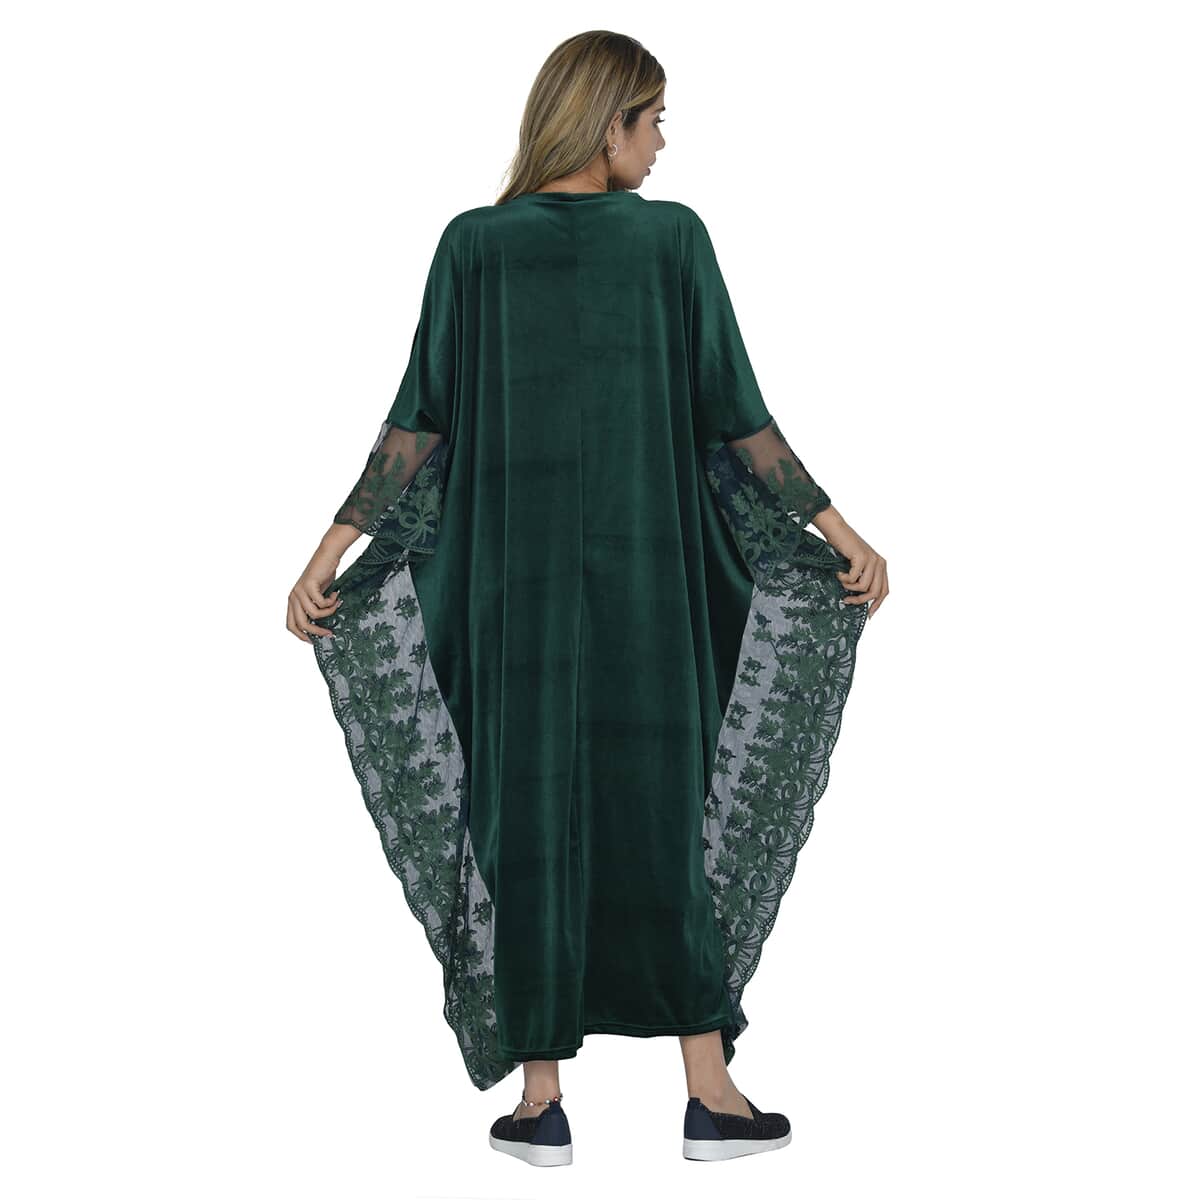 Tamsy Black Label - Lux Stretch Velvet Kaftan with Lace in Emerald Green - One Size Fits Most image number 1